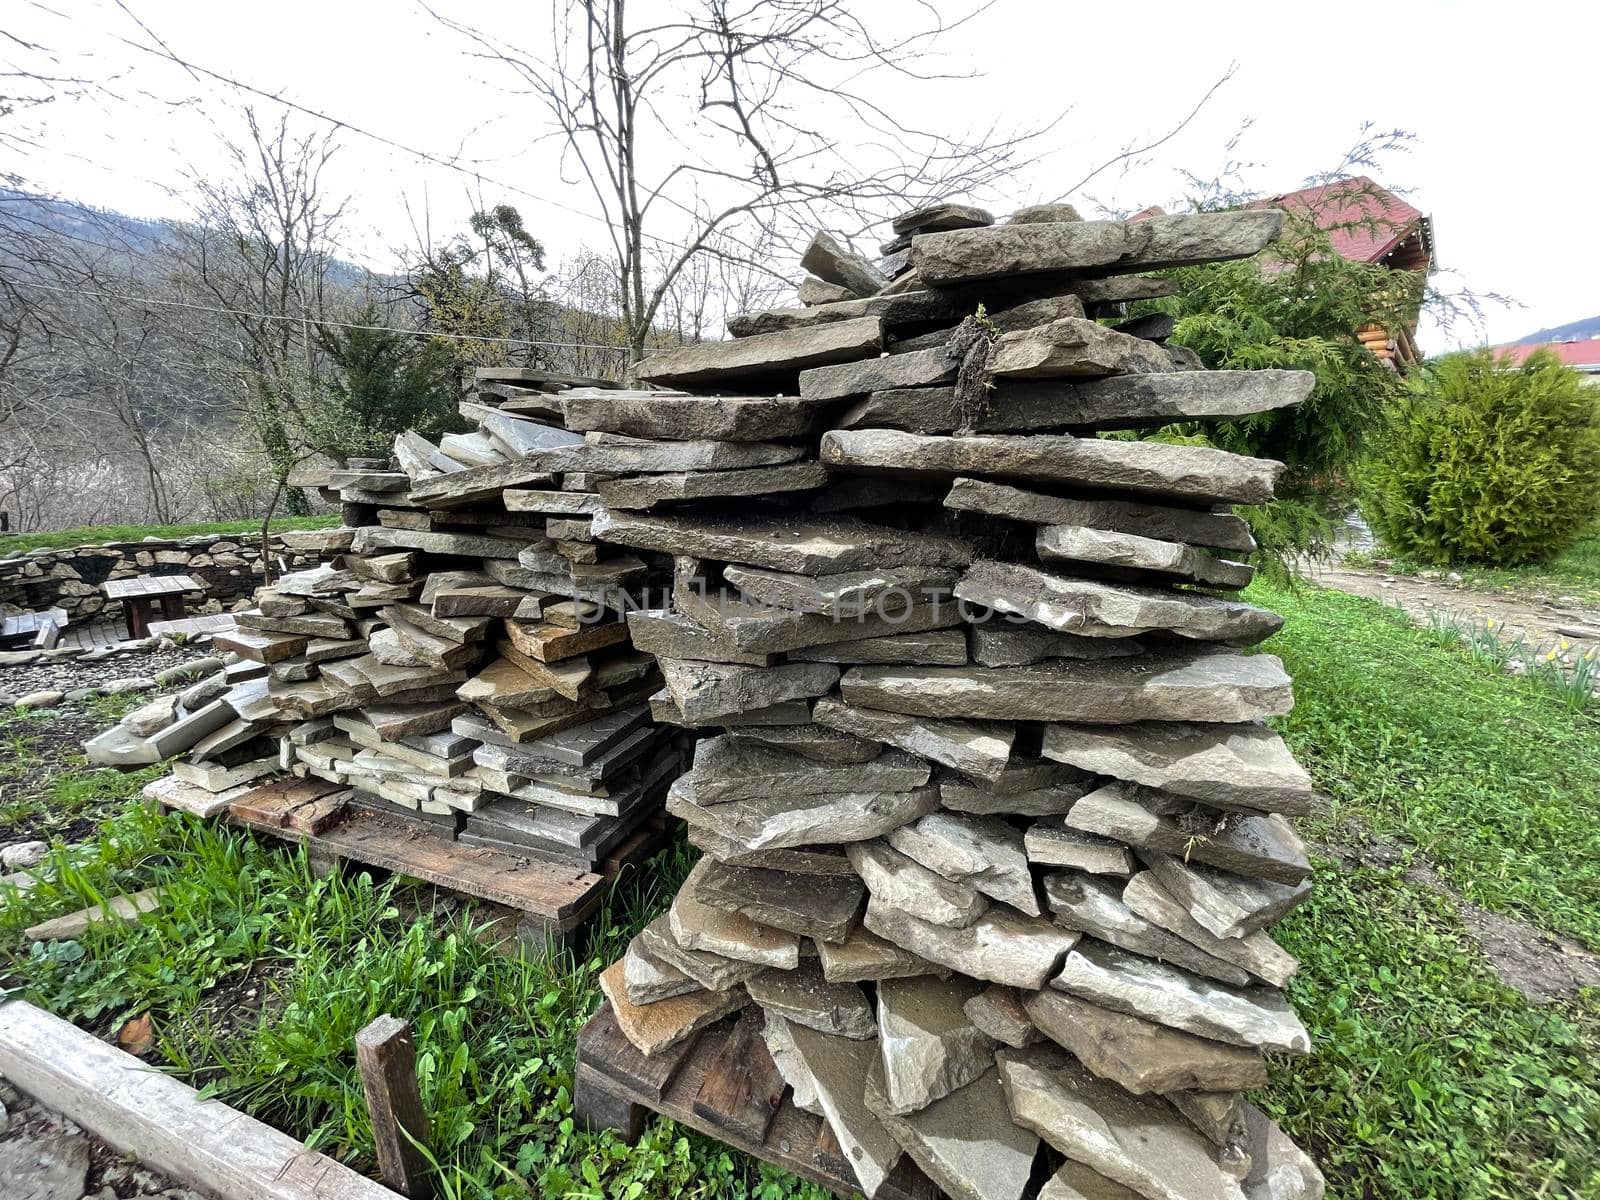 Pile of building materials on street in countryside. Close up of stone tiles on ground outdoor. Concept of constructing sidewalk. by epidemiks